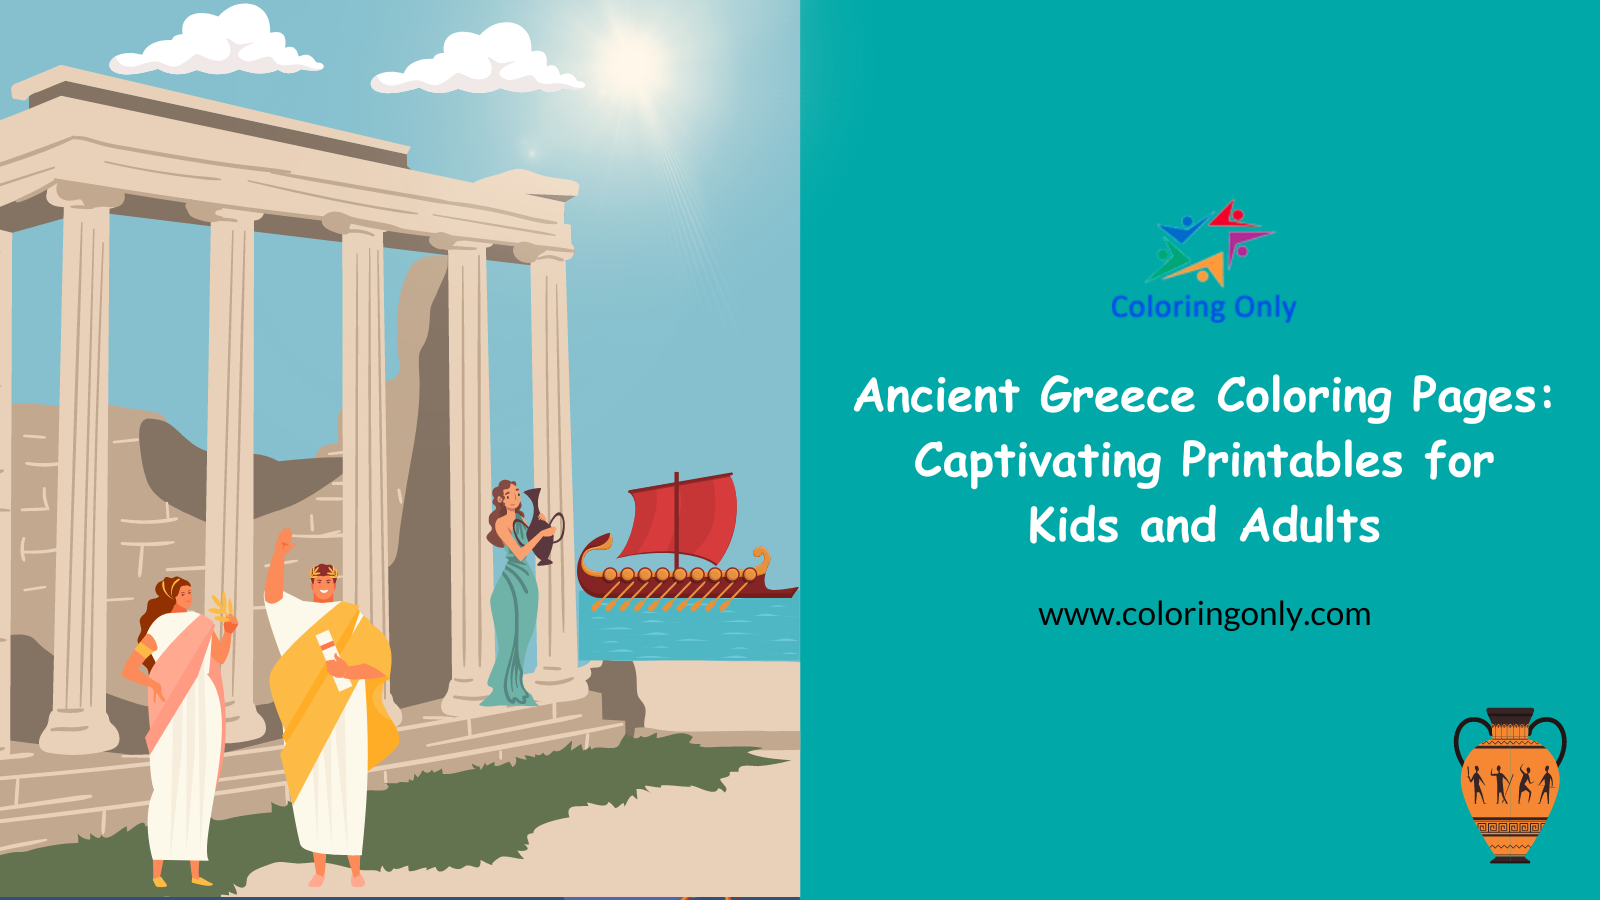 Ancient Greece Coloring Pages: Captivating Printables for Kids and Adults